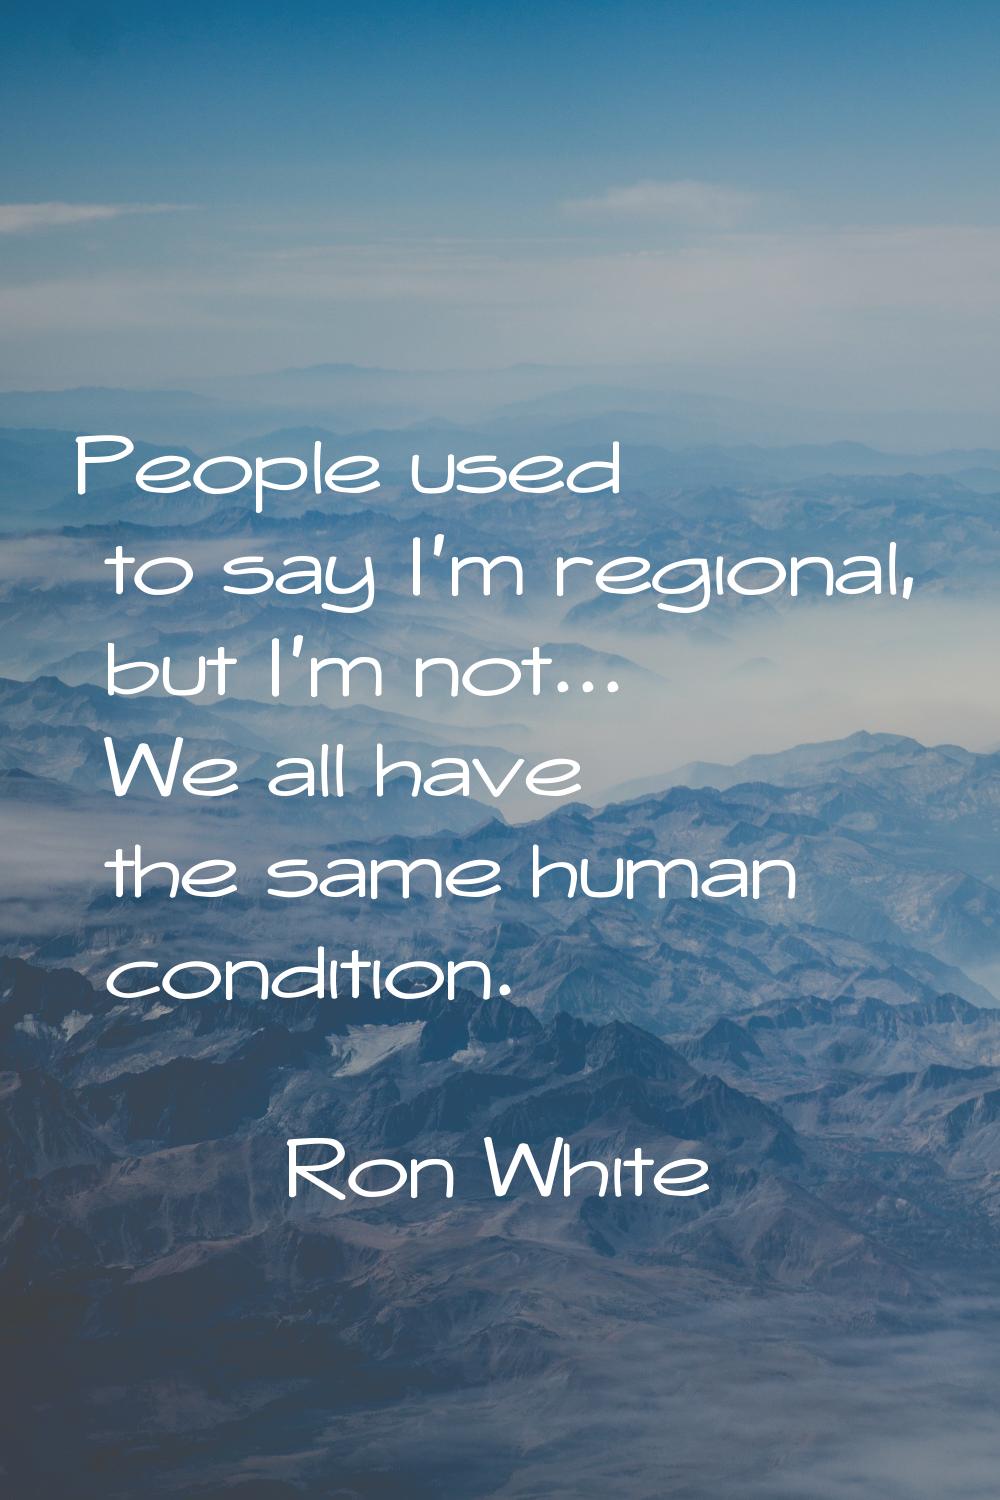 People used to say I'm regional, but I'm not... We all have the same human condition.